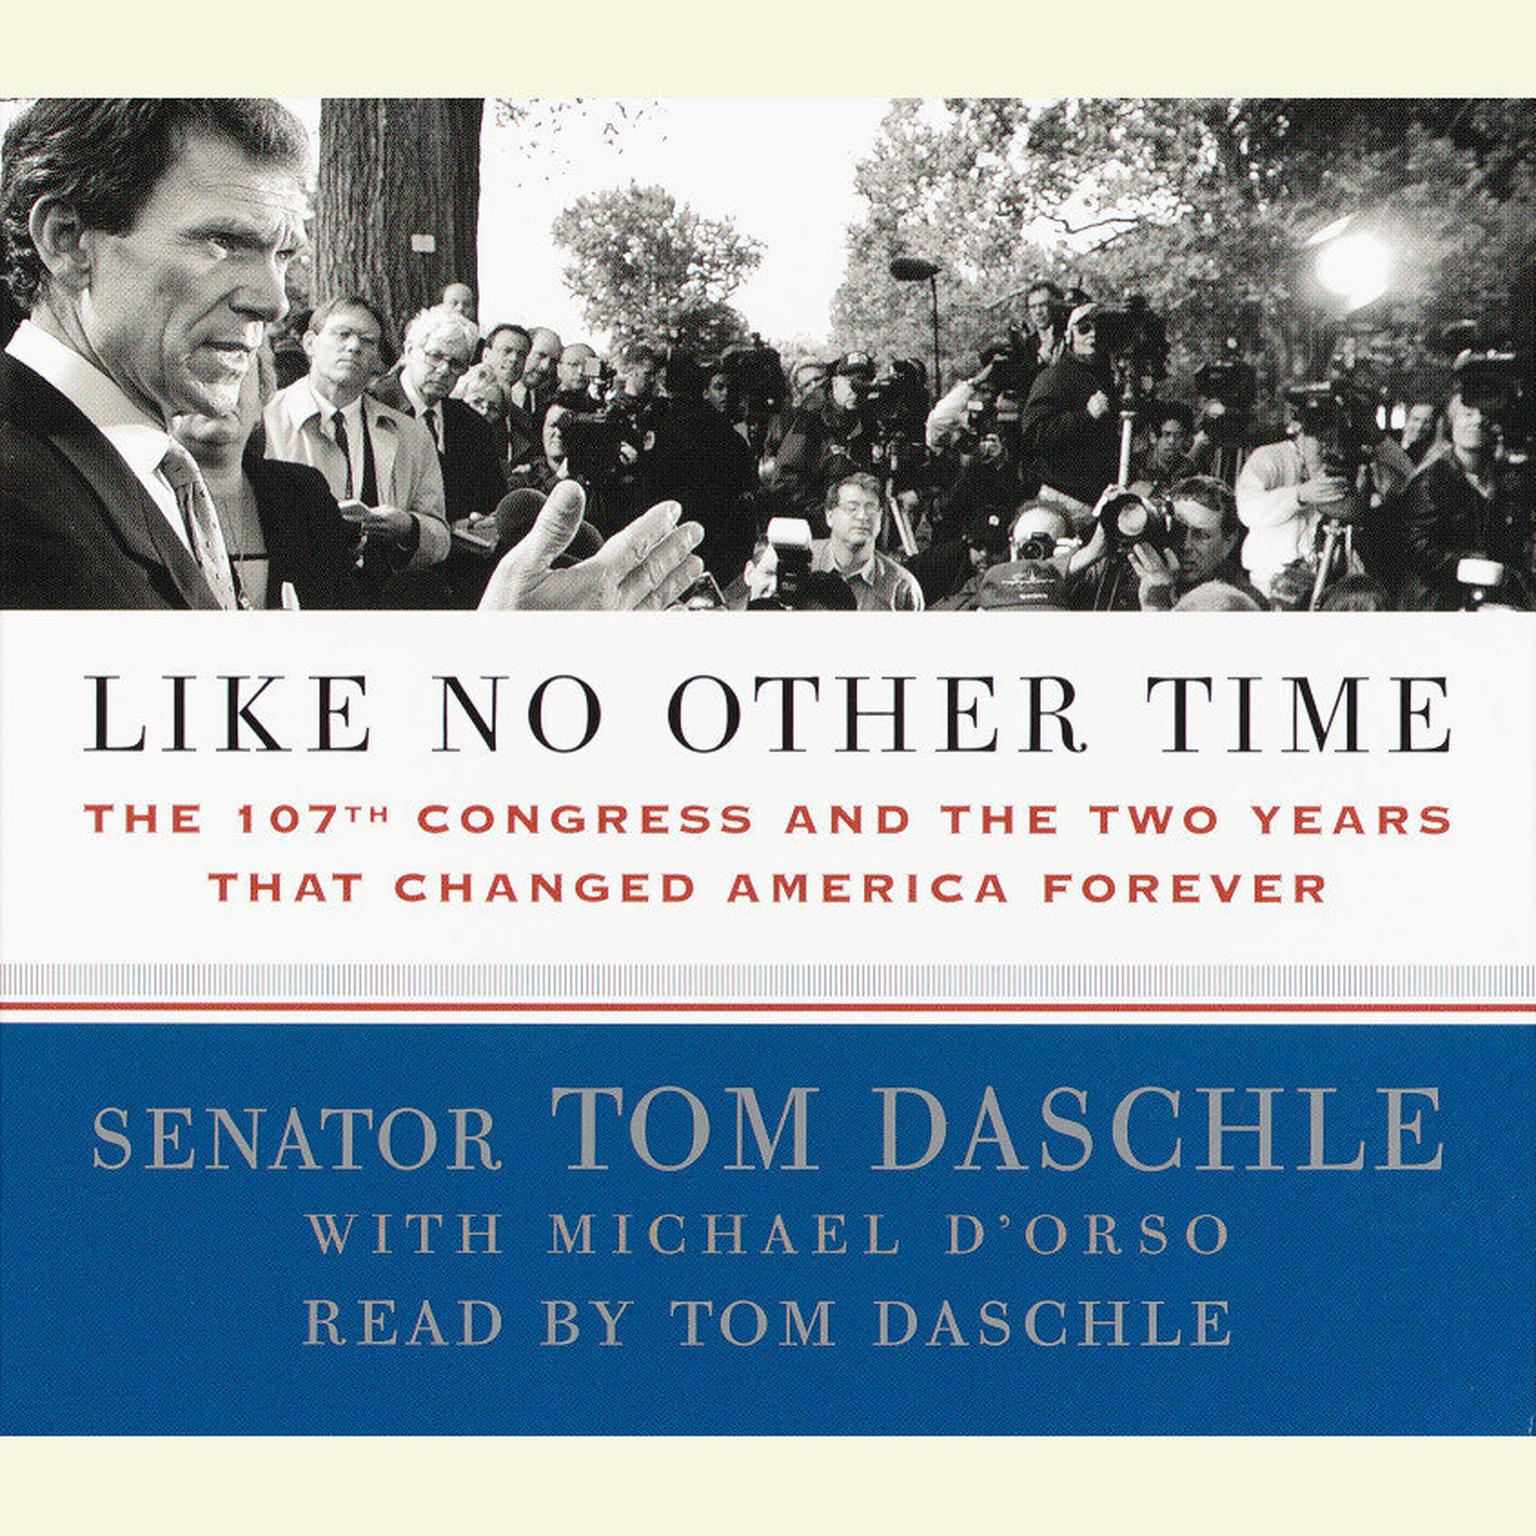 Like No Other Time (Abridged): The 107th Congress and the Two Years That Changed America Forever Audiobook, by Tom Daschle